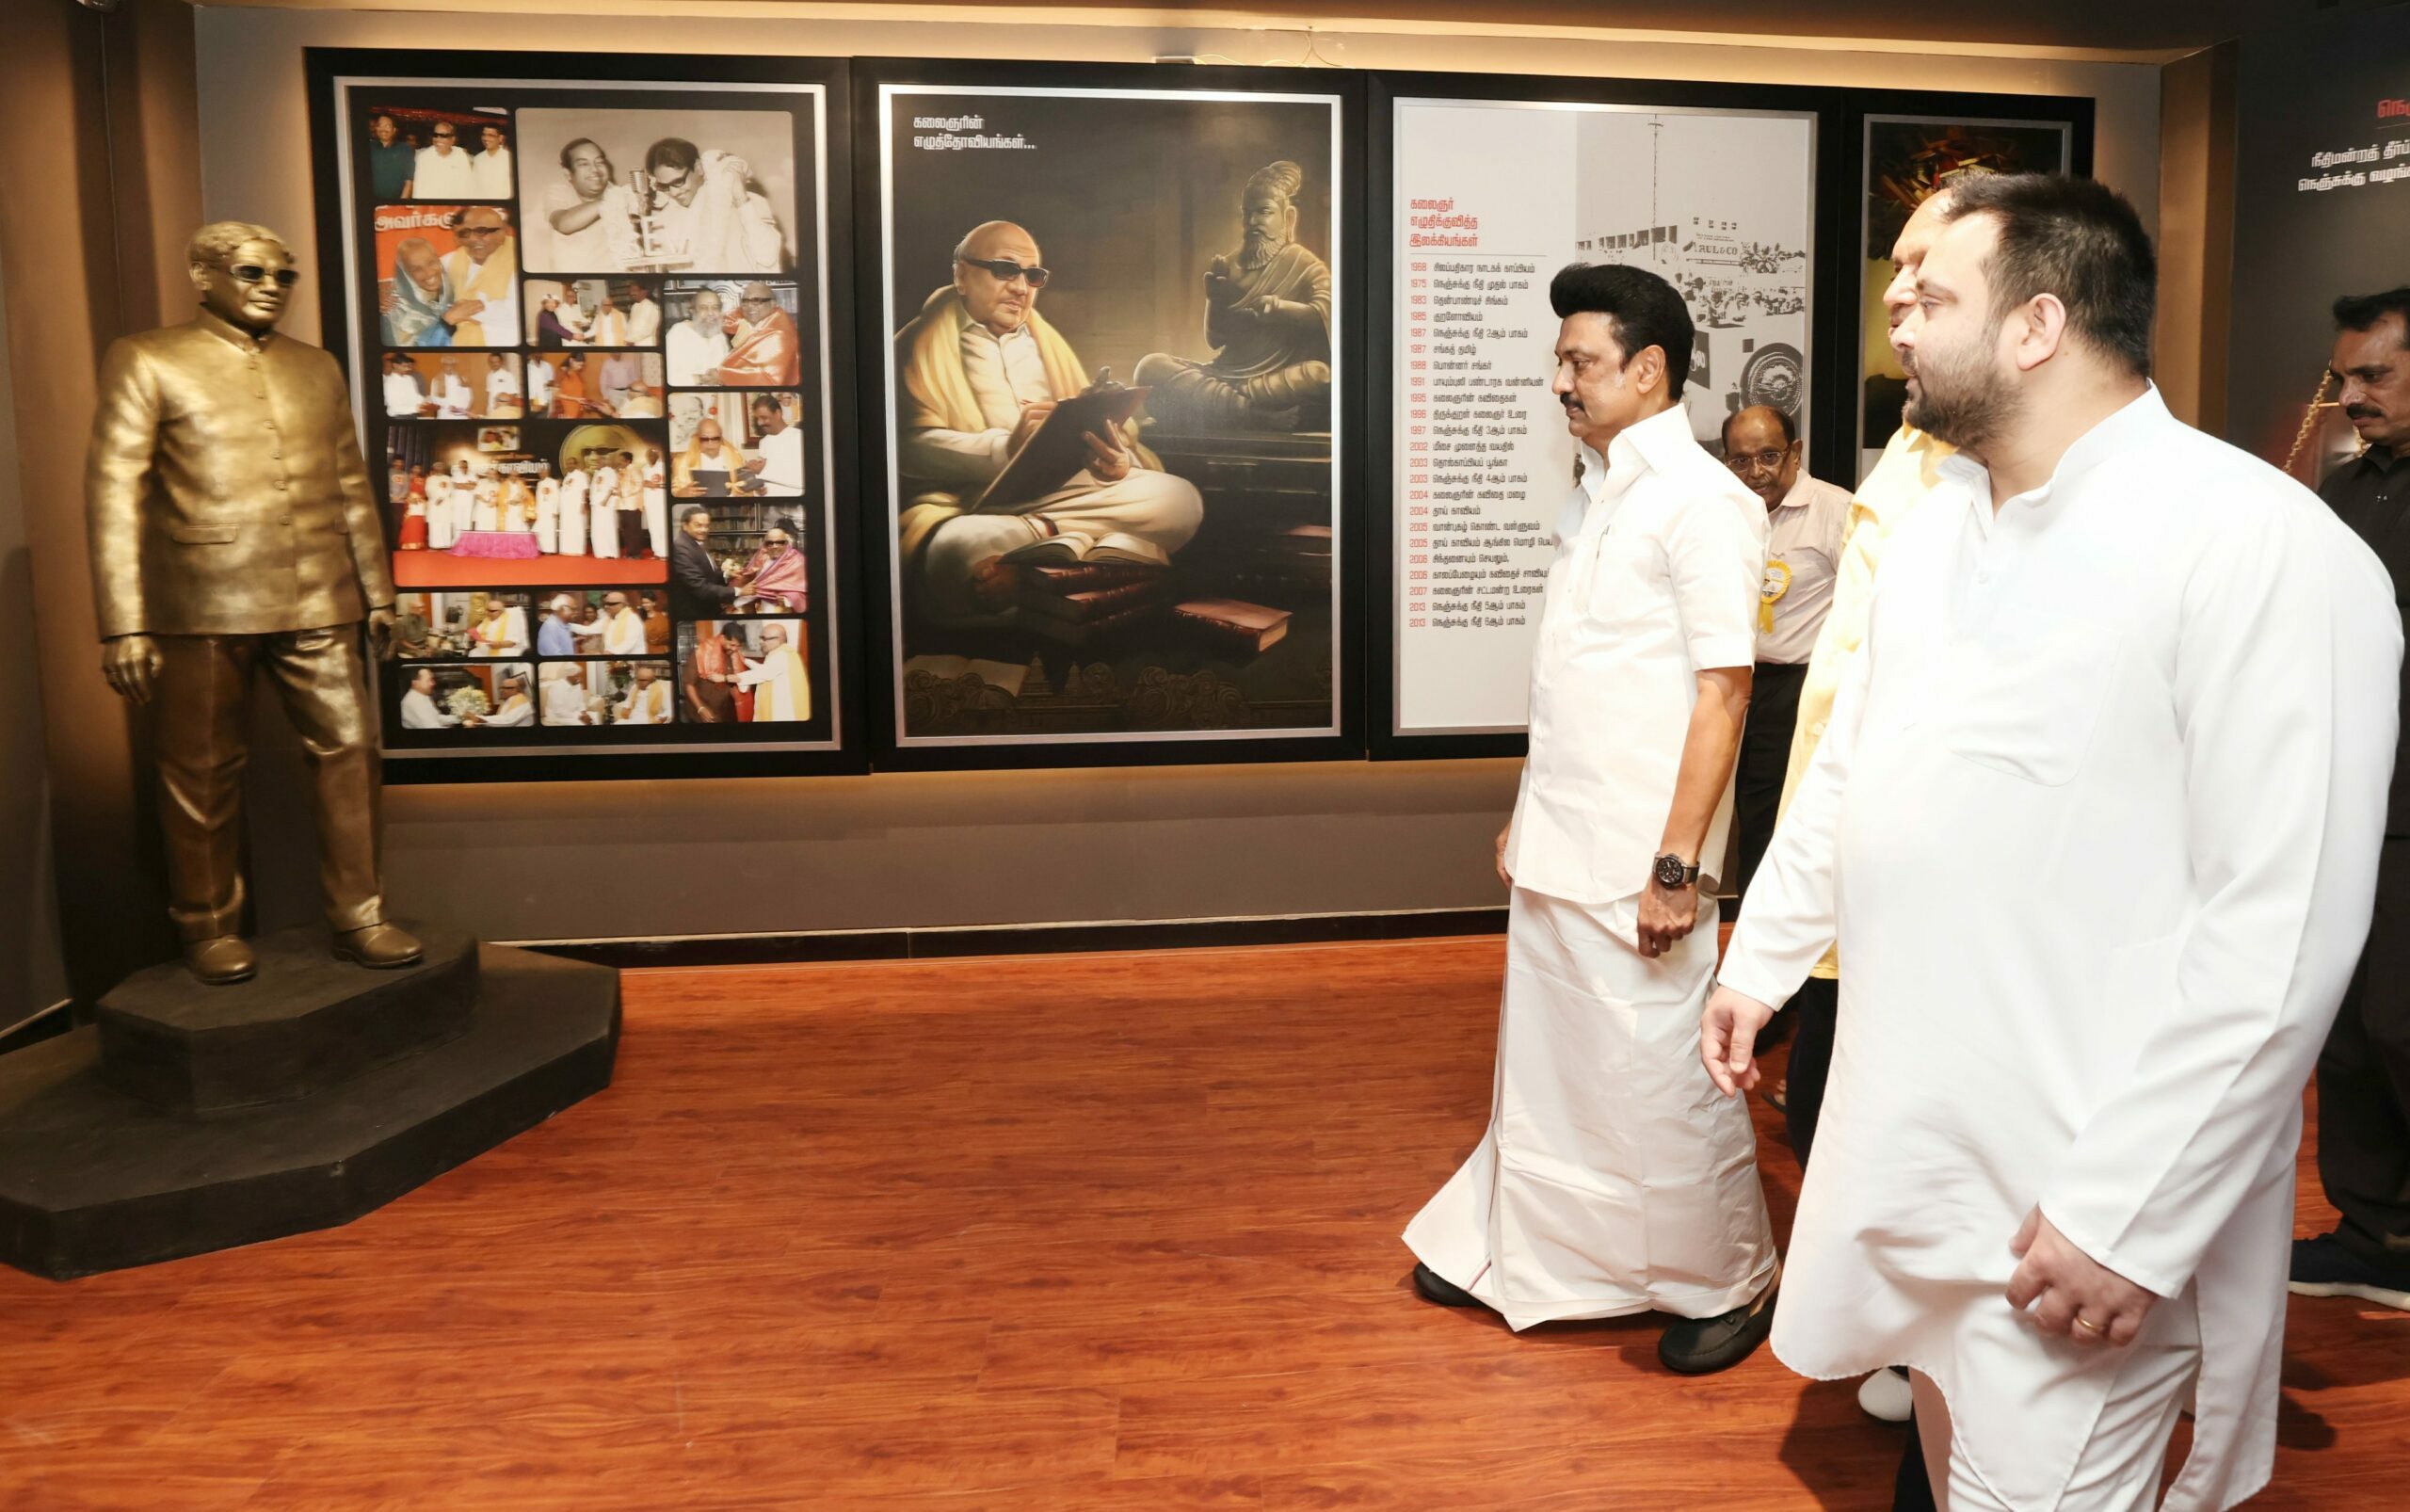 Stalin at the memorial to late chief minister M Karunanidhi, along with Deputy Chief Minister of Bihar Tejashwi Prasad Yadav. (Twitter)